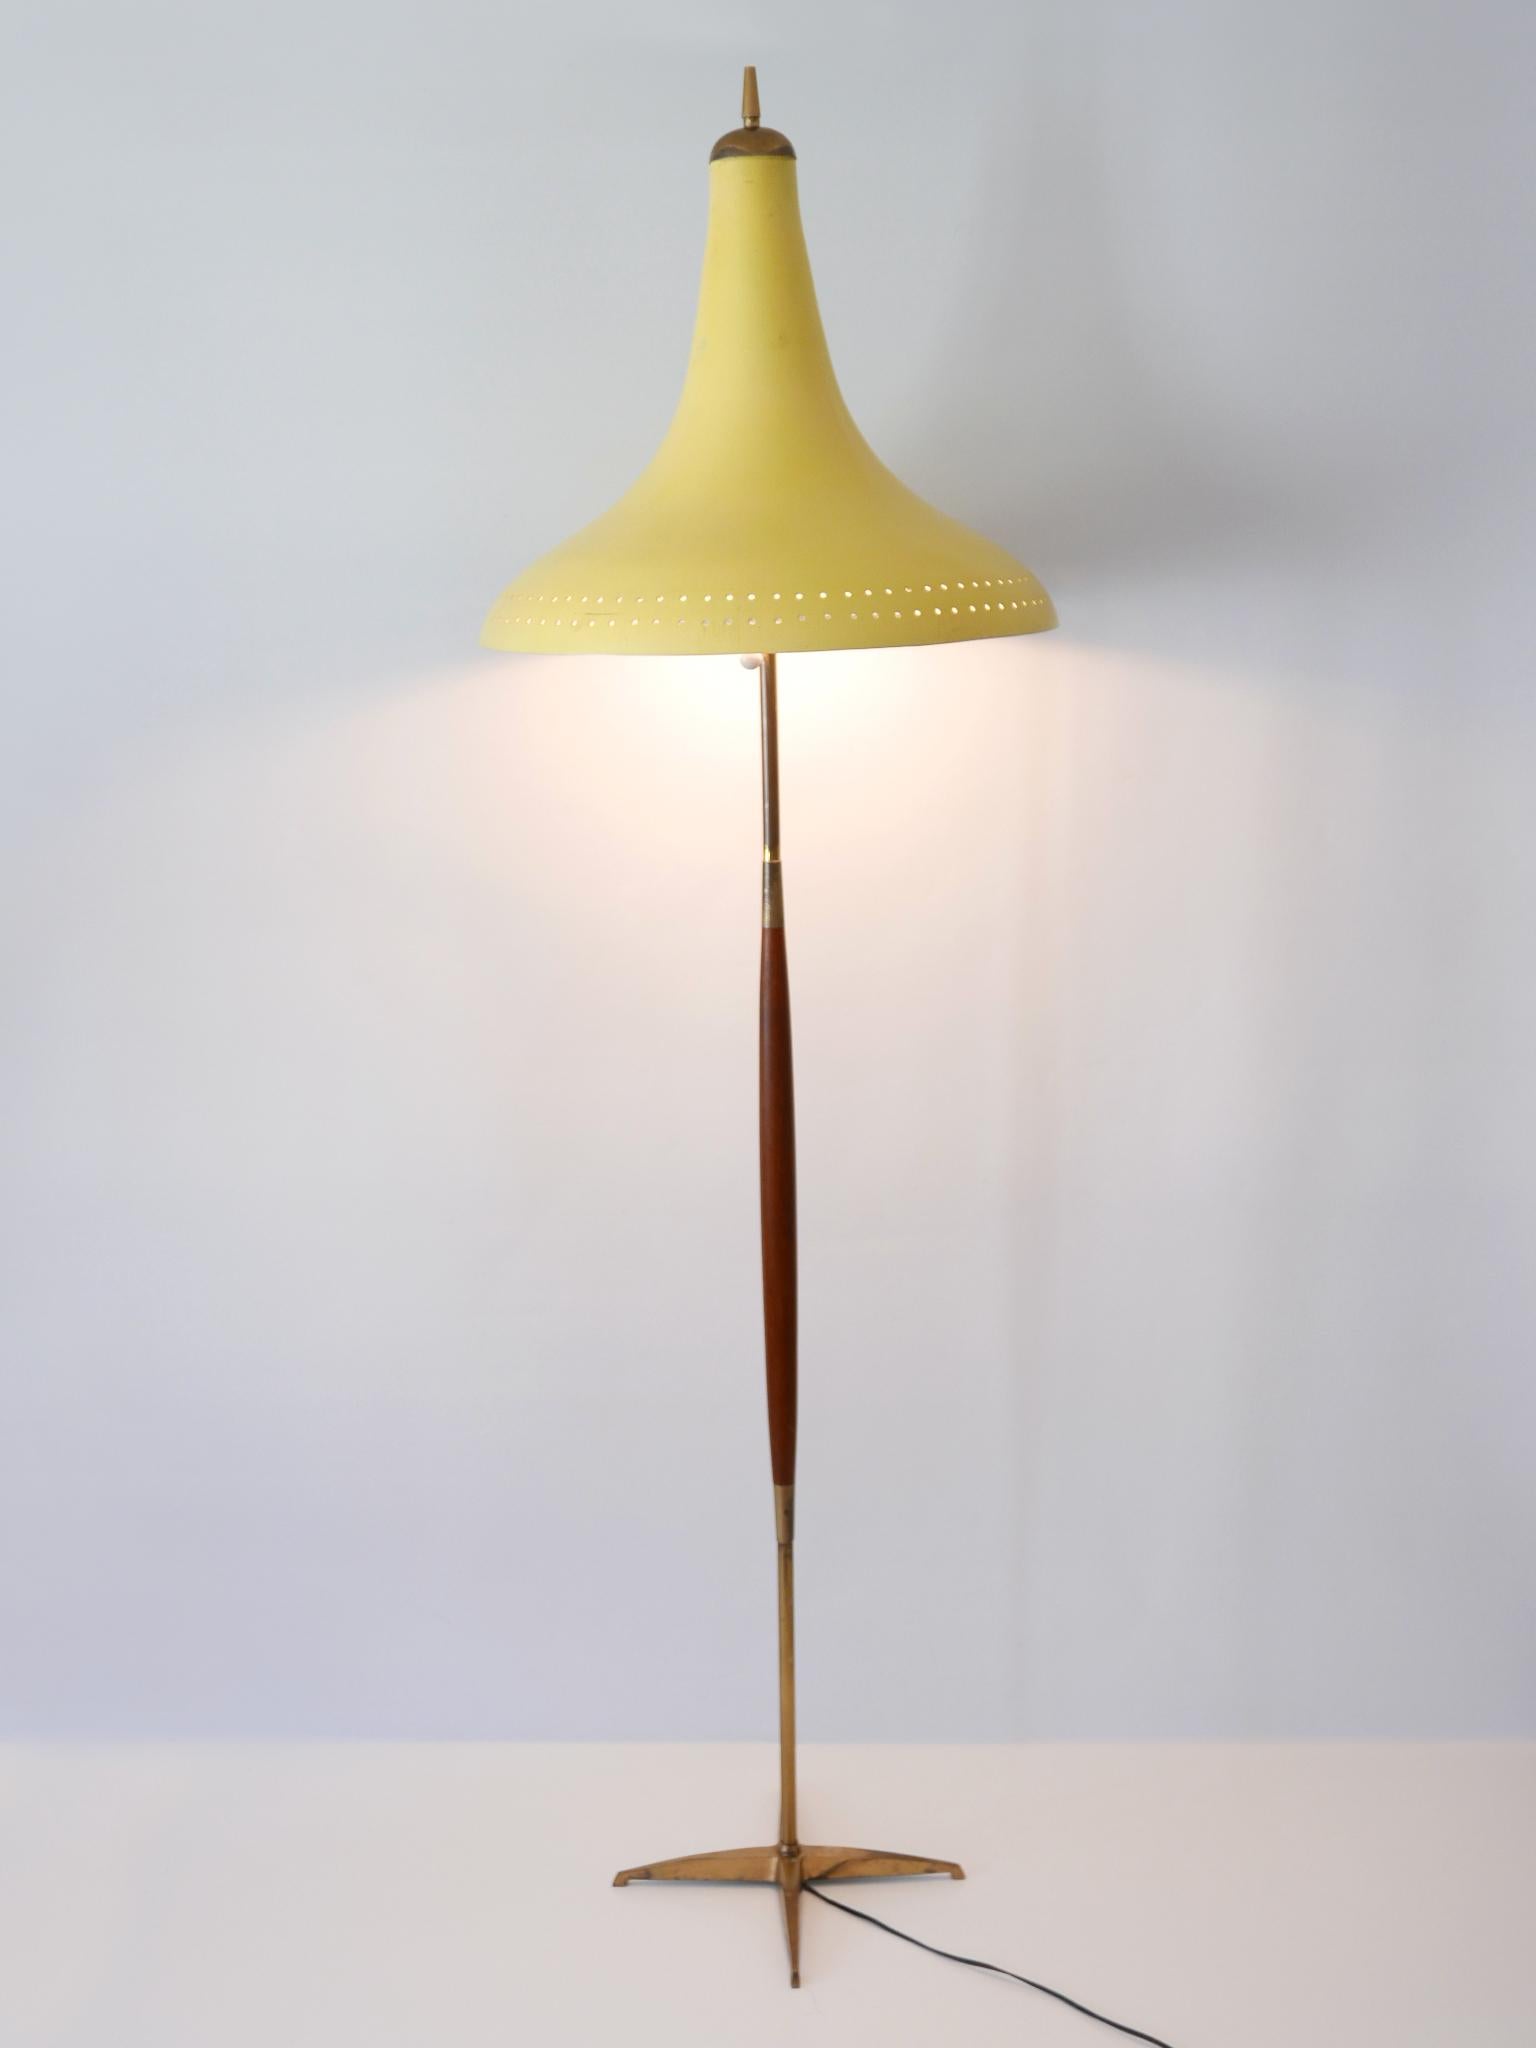 Absolutely rare, elegant and highly decorative Mid-Century Modern floor lamp or standing light. Designed and manufactured probably in Austria, 1960s.

Executed in teak, brass, metal and aluminium, the lamp needs 2 x E27 / E26 Edison screw fit bulbs,